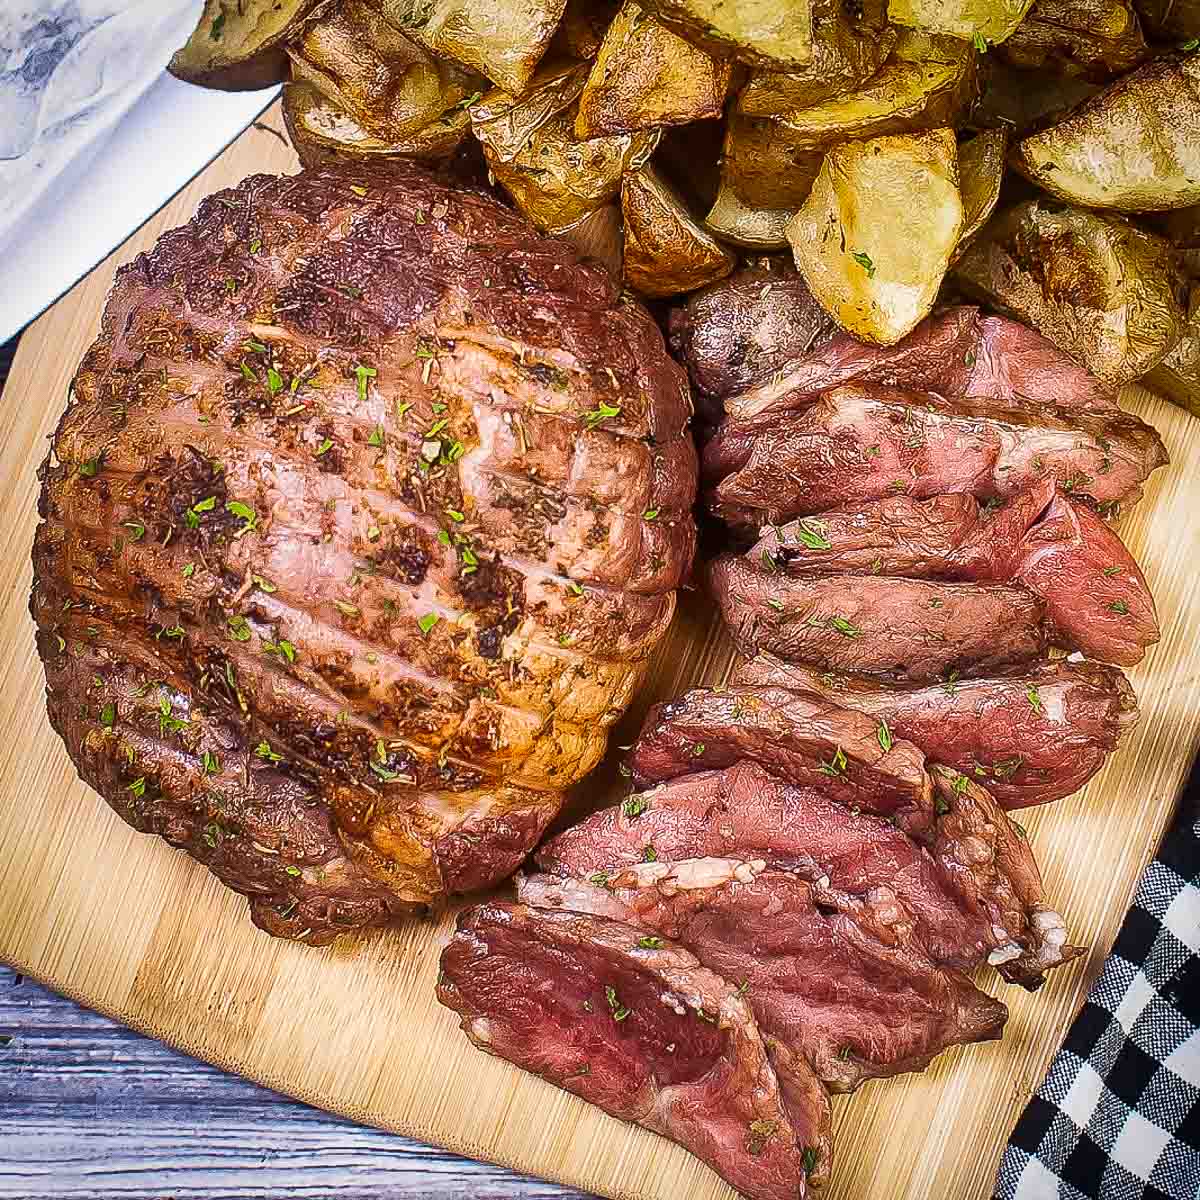 Overhead shot of a full lamb roast with slices of lamb and potato wedges on the side on a wooden cutting board.